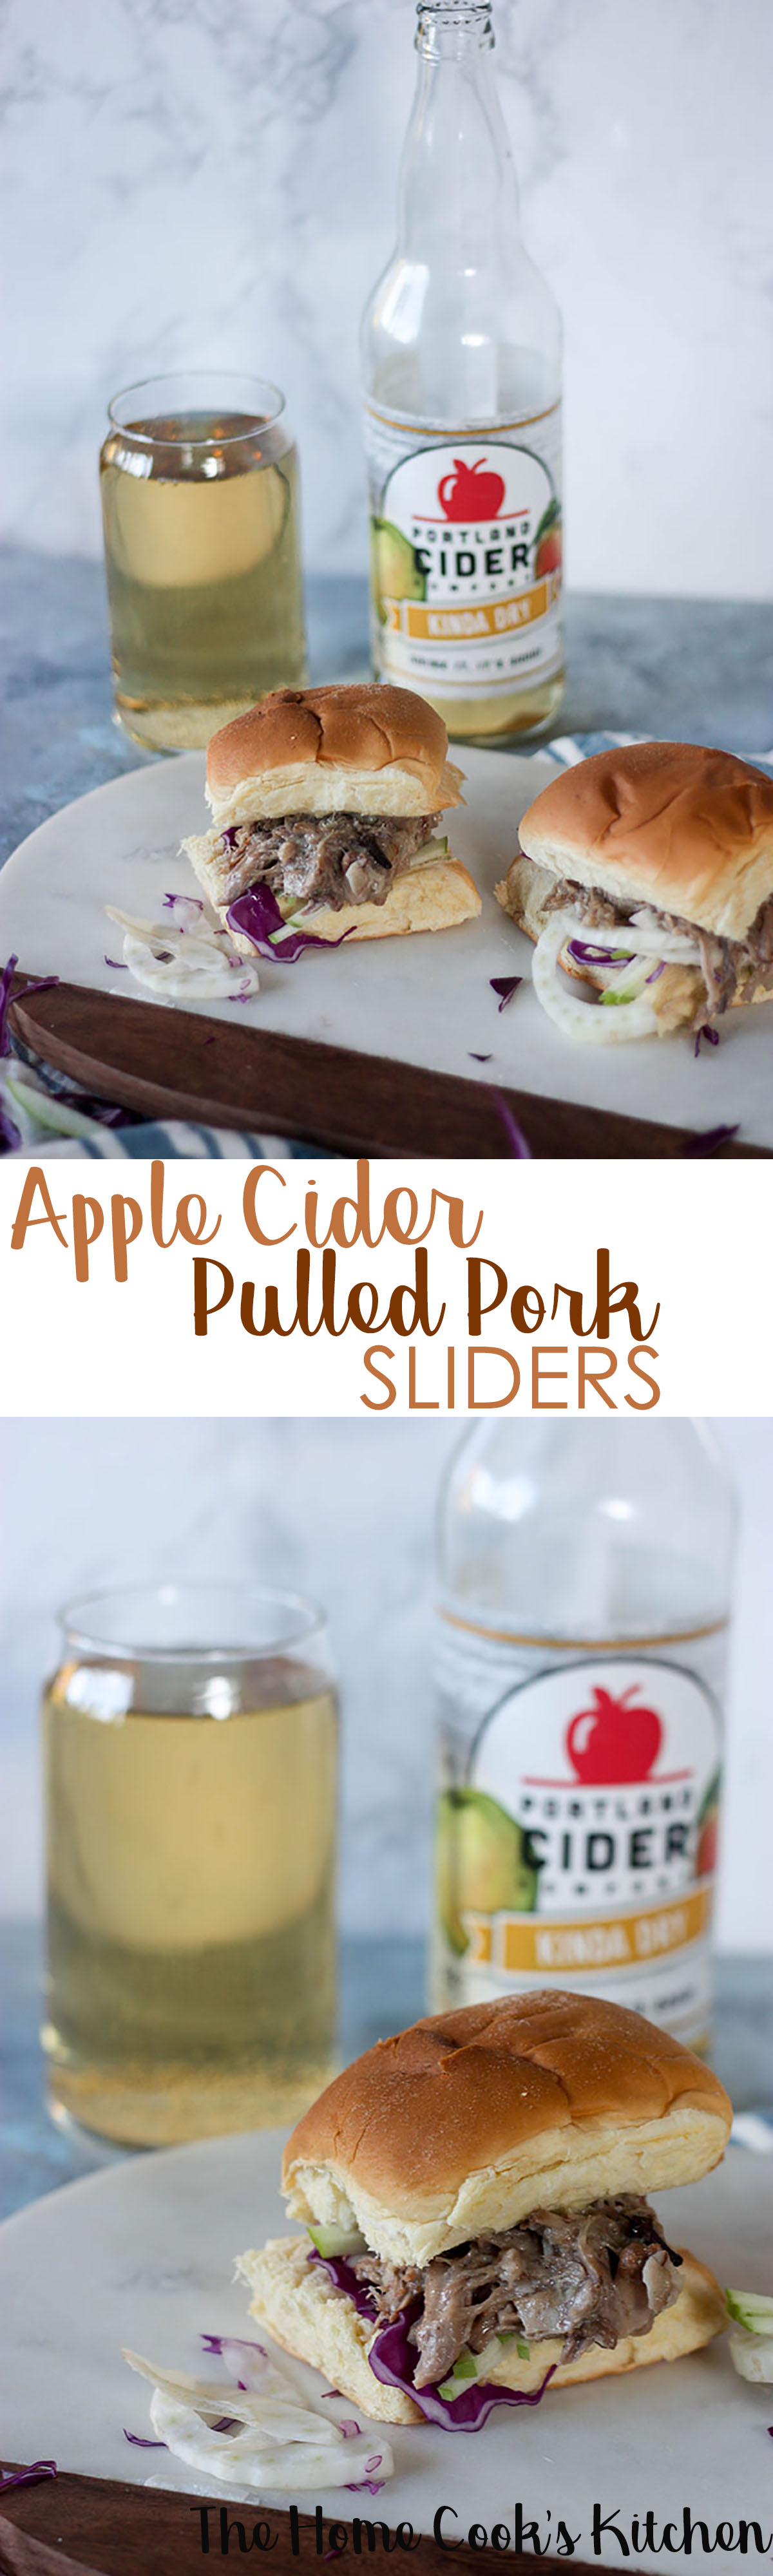 Apple Cider Pulled Pork Sliders www.thehomecookskitchen.com - a great recipe for your next game day party! Pin for later!